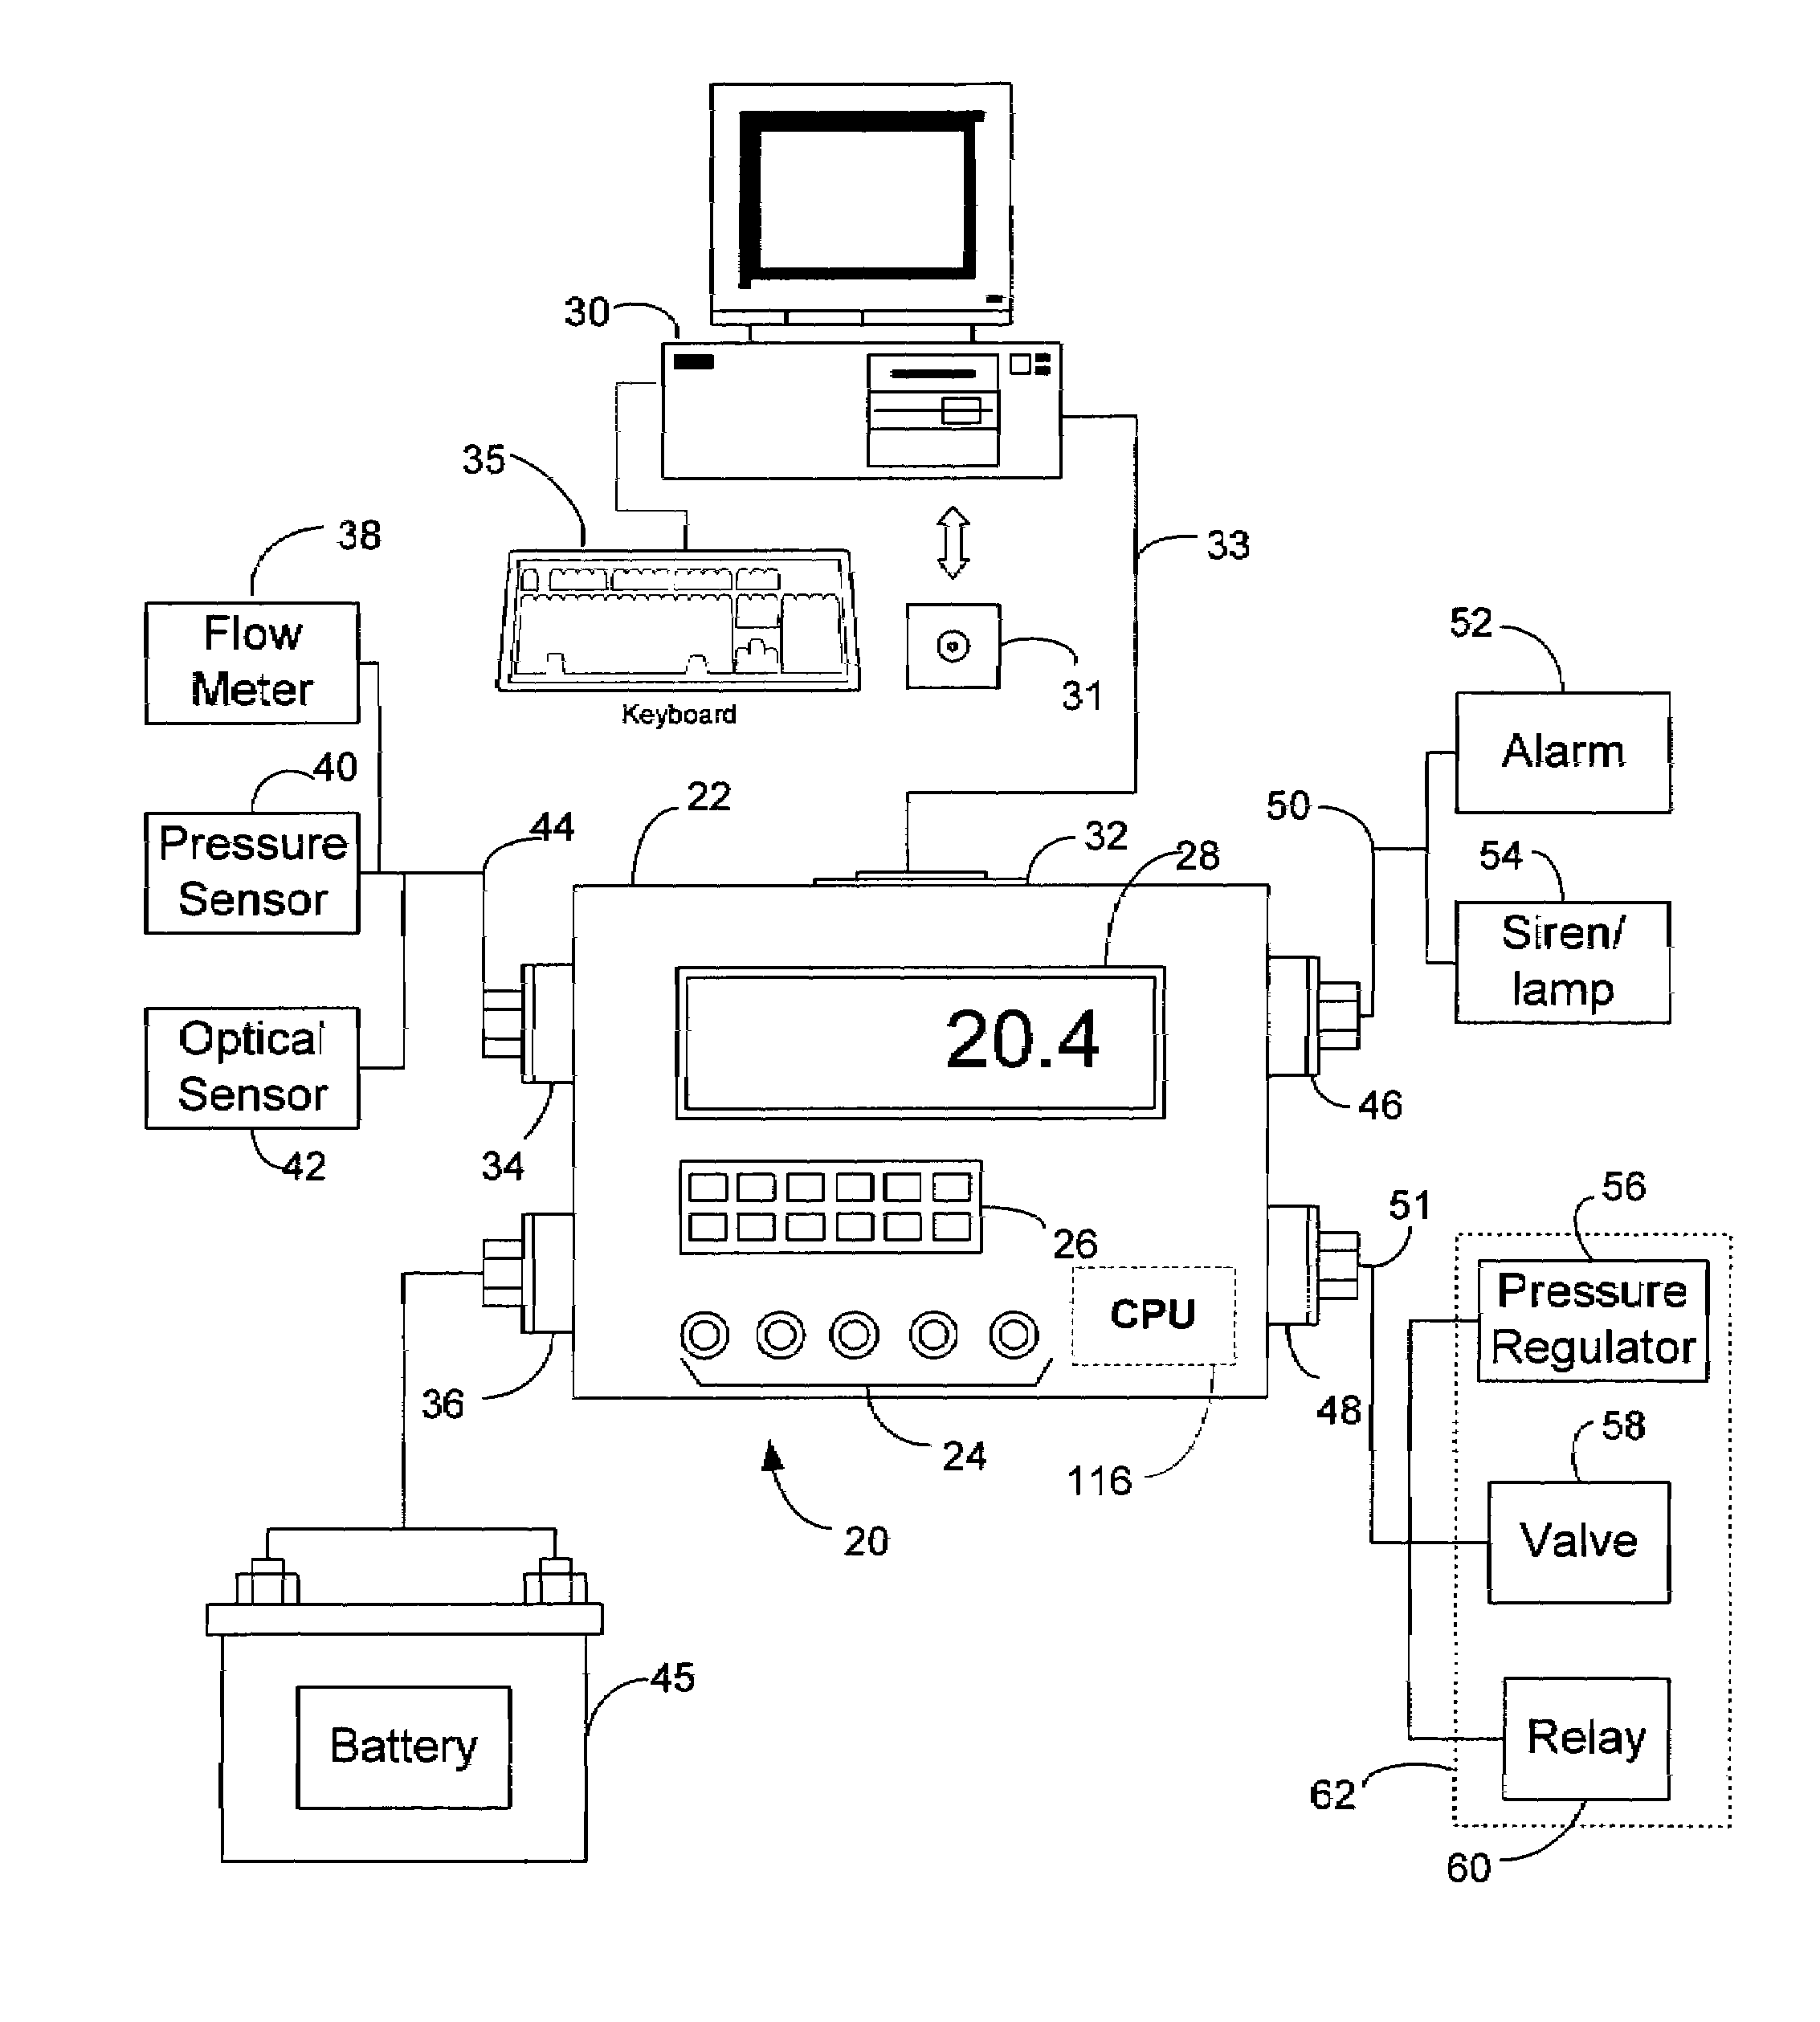 Object-oriented operating system for a spray controller